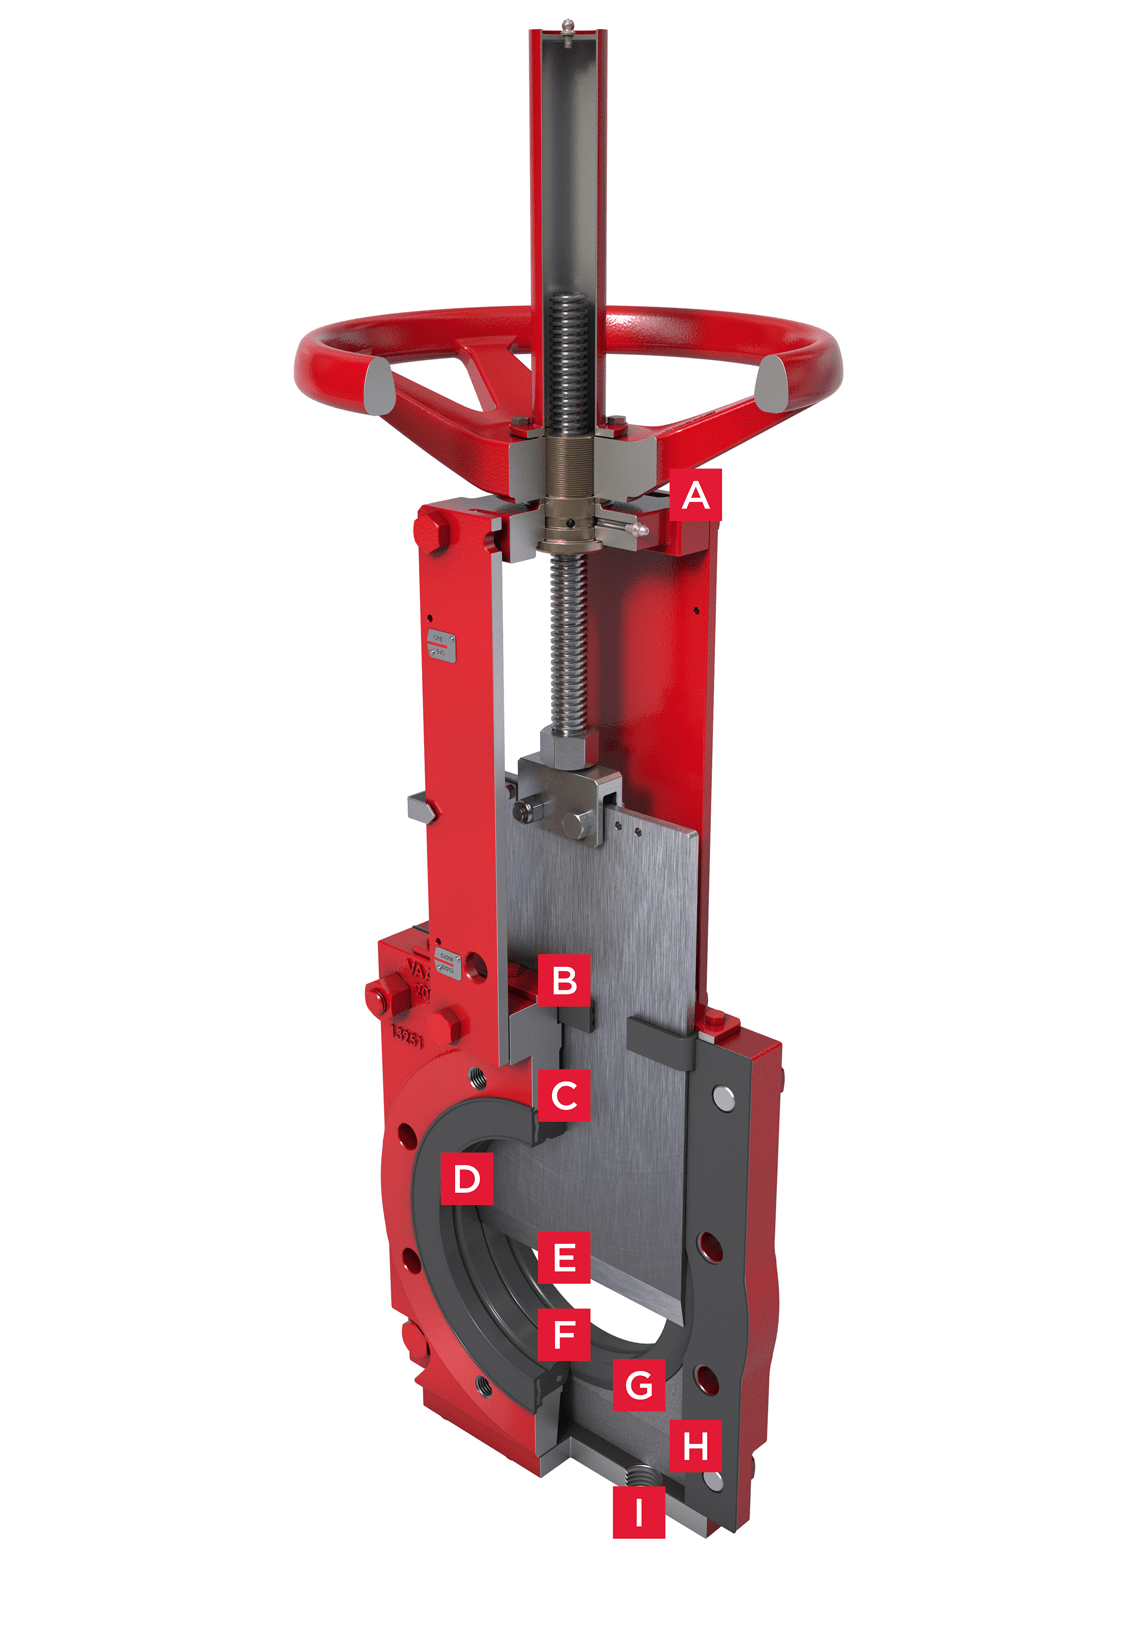 Bidirectional Knife Gate Valve Series 765 Features